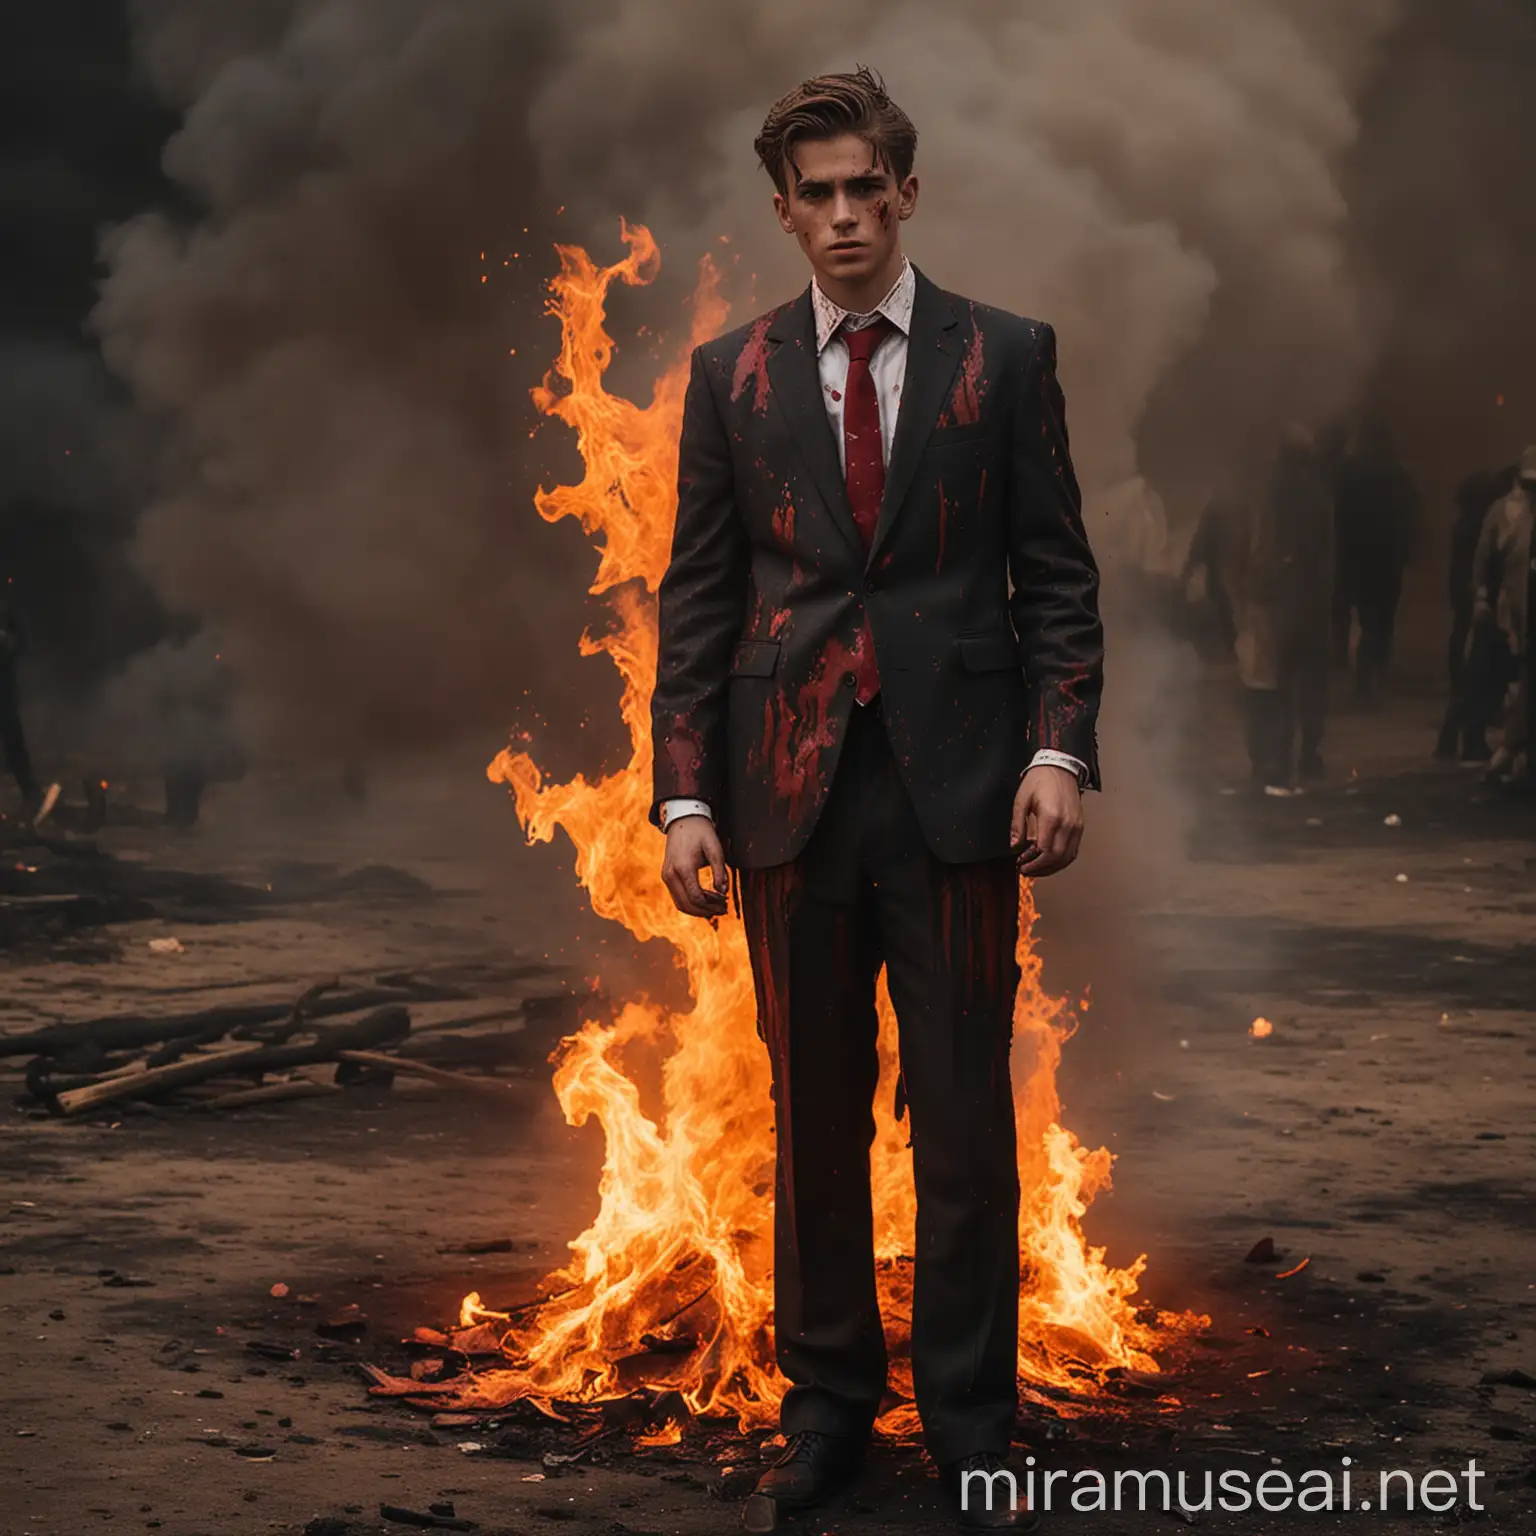 Young Man in Suit Standing Amidst Flames with Bloodstains